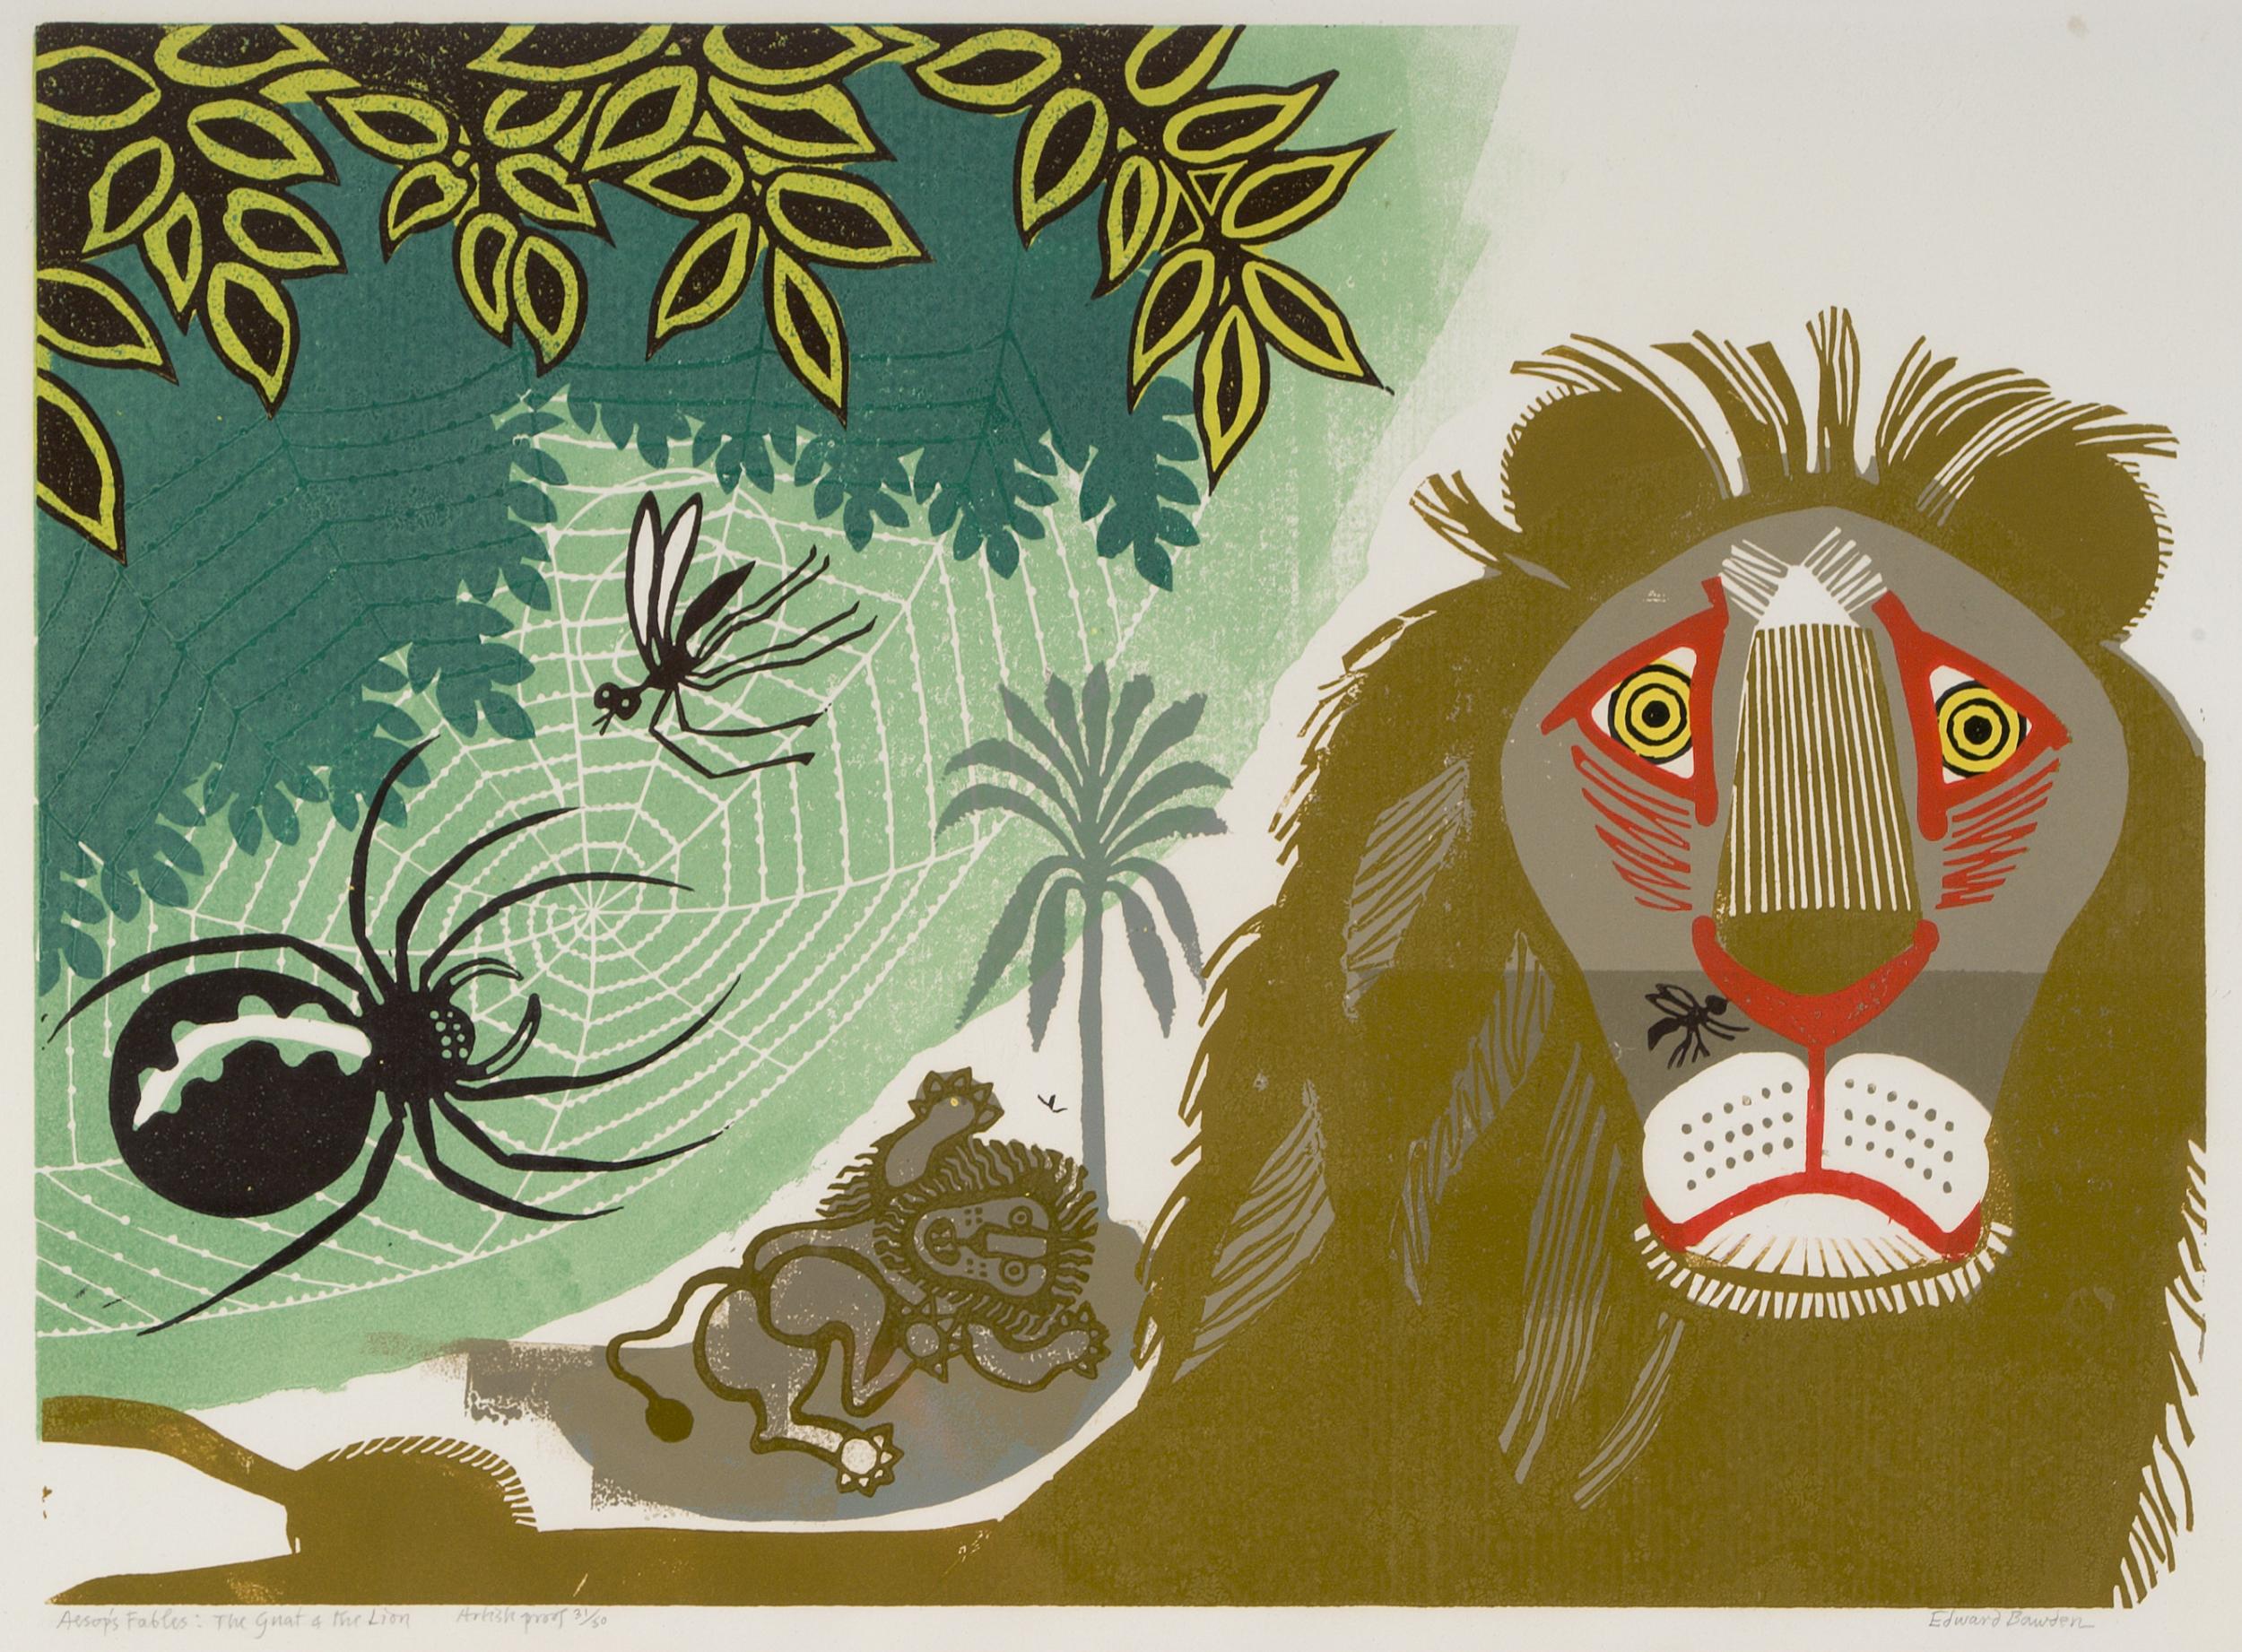 ‘Gnat and Lion’, taken from ‘Aesop’s Fables’